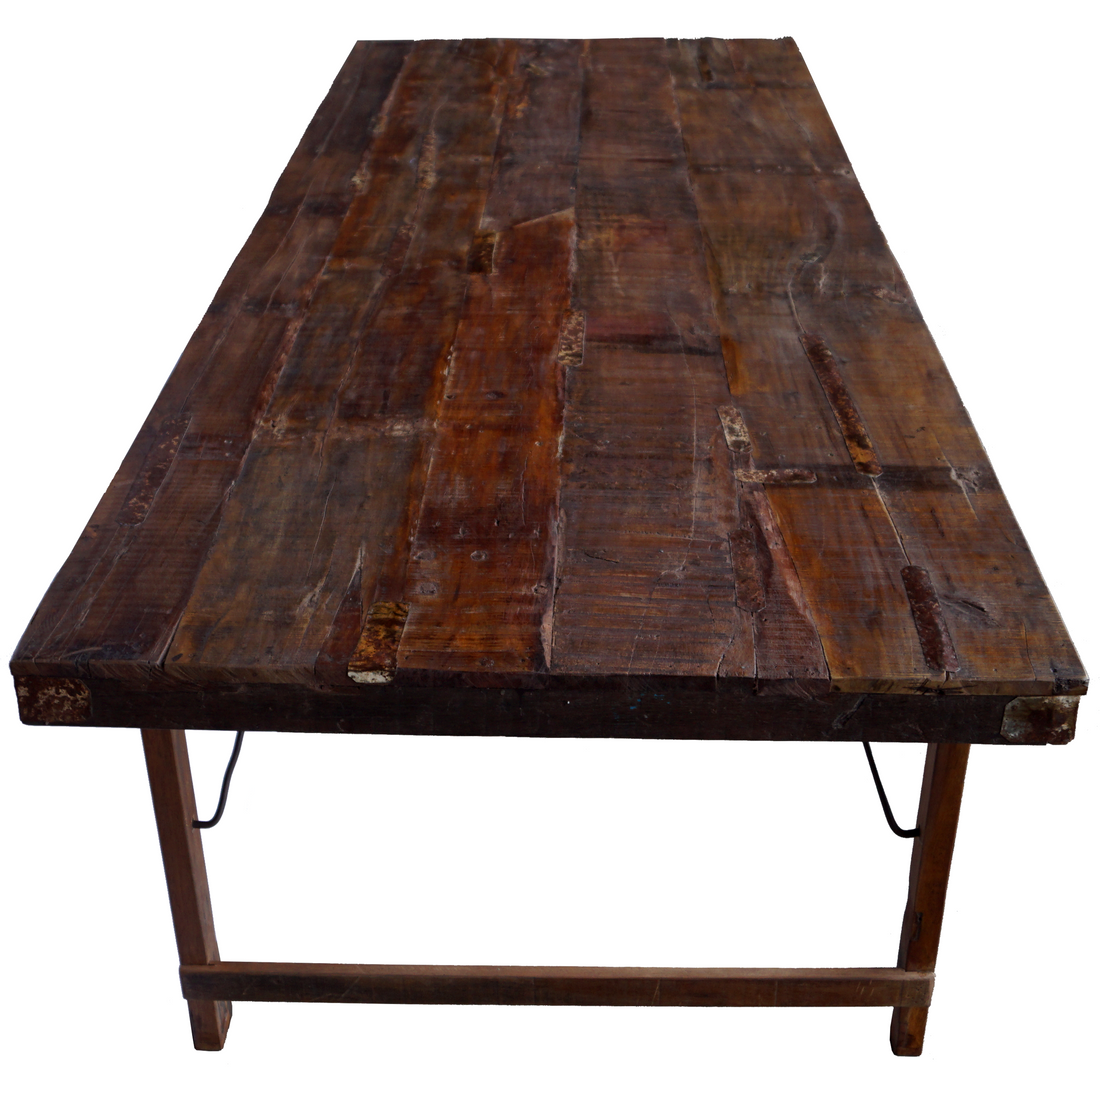 Trademark Living Kuta dining table in wood with beautiful patina